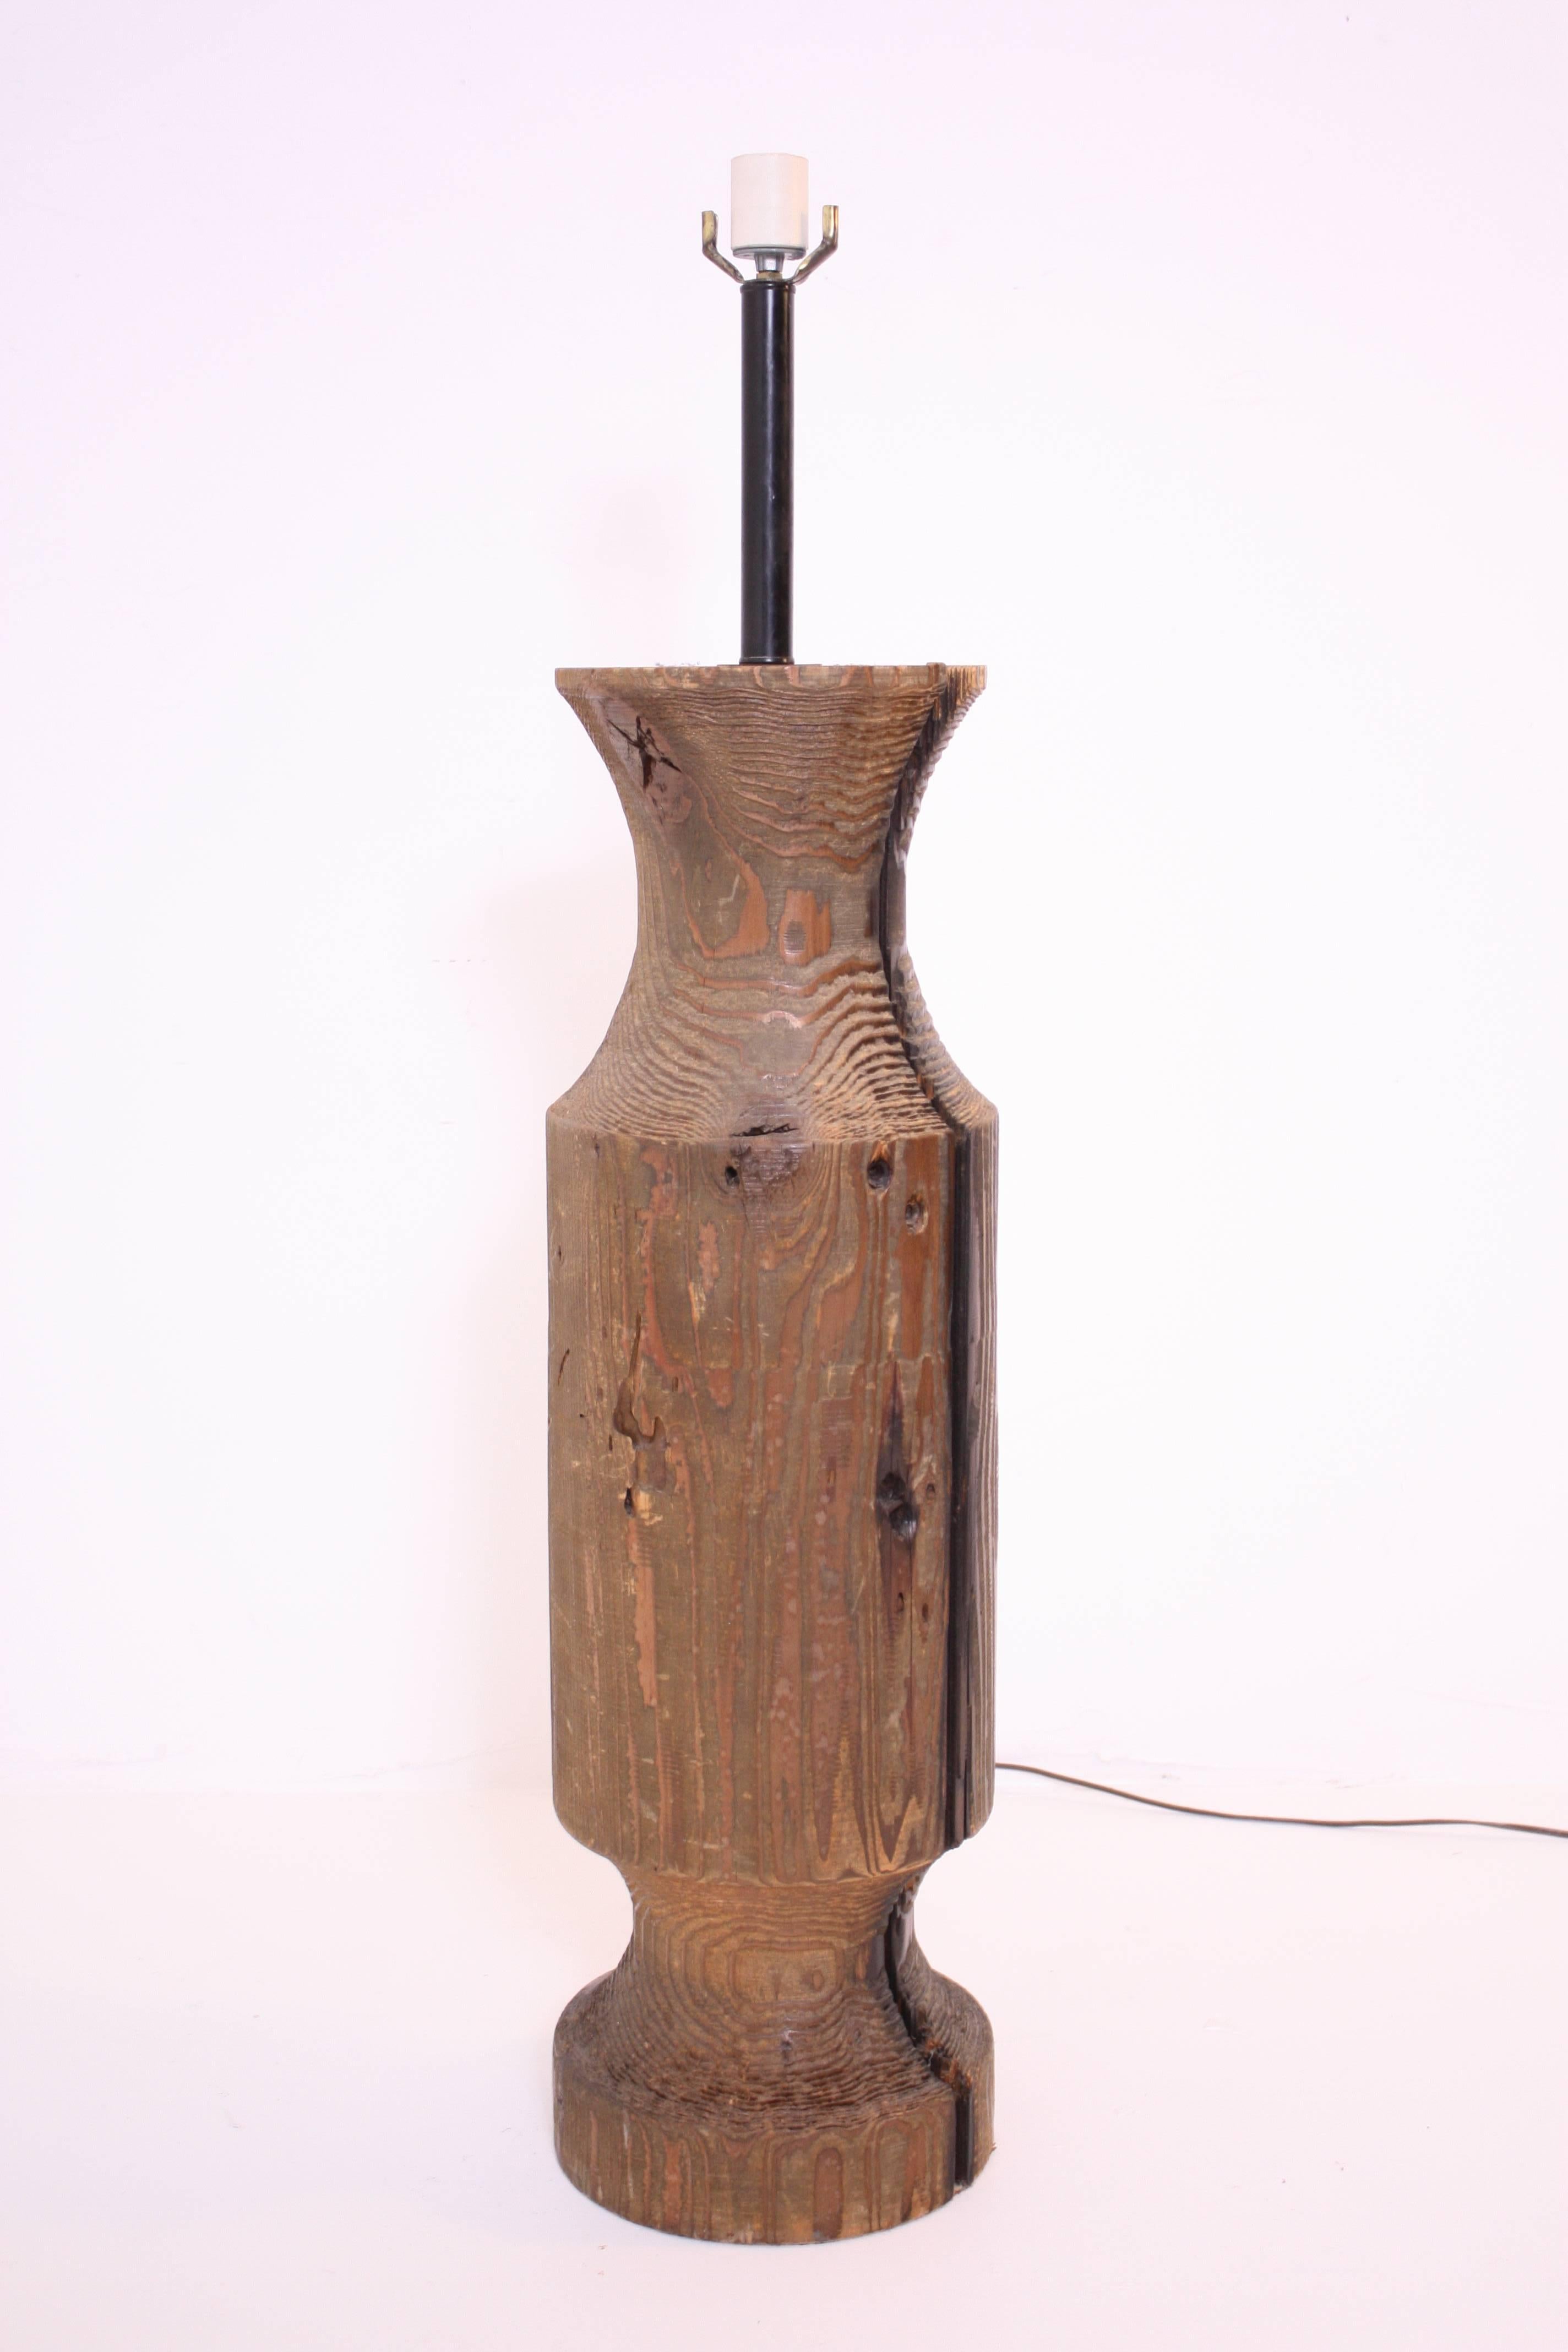 Large turned wood lamp with wonderful natural splits, knots and graining. From the curated collection Space 20th Century Modern.